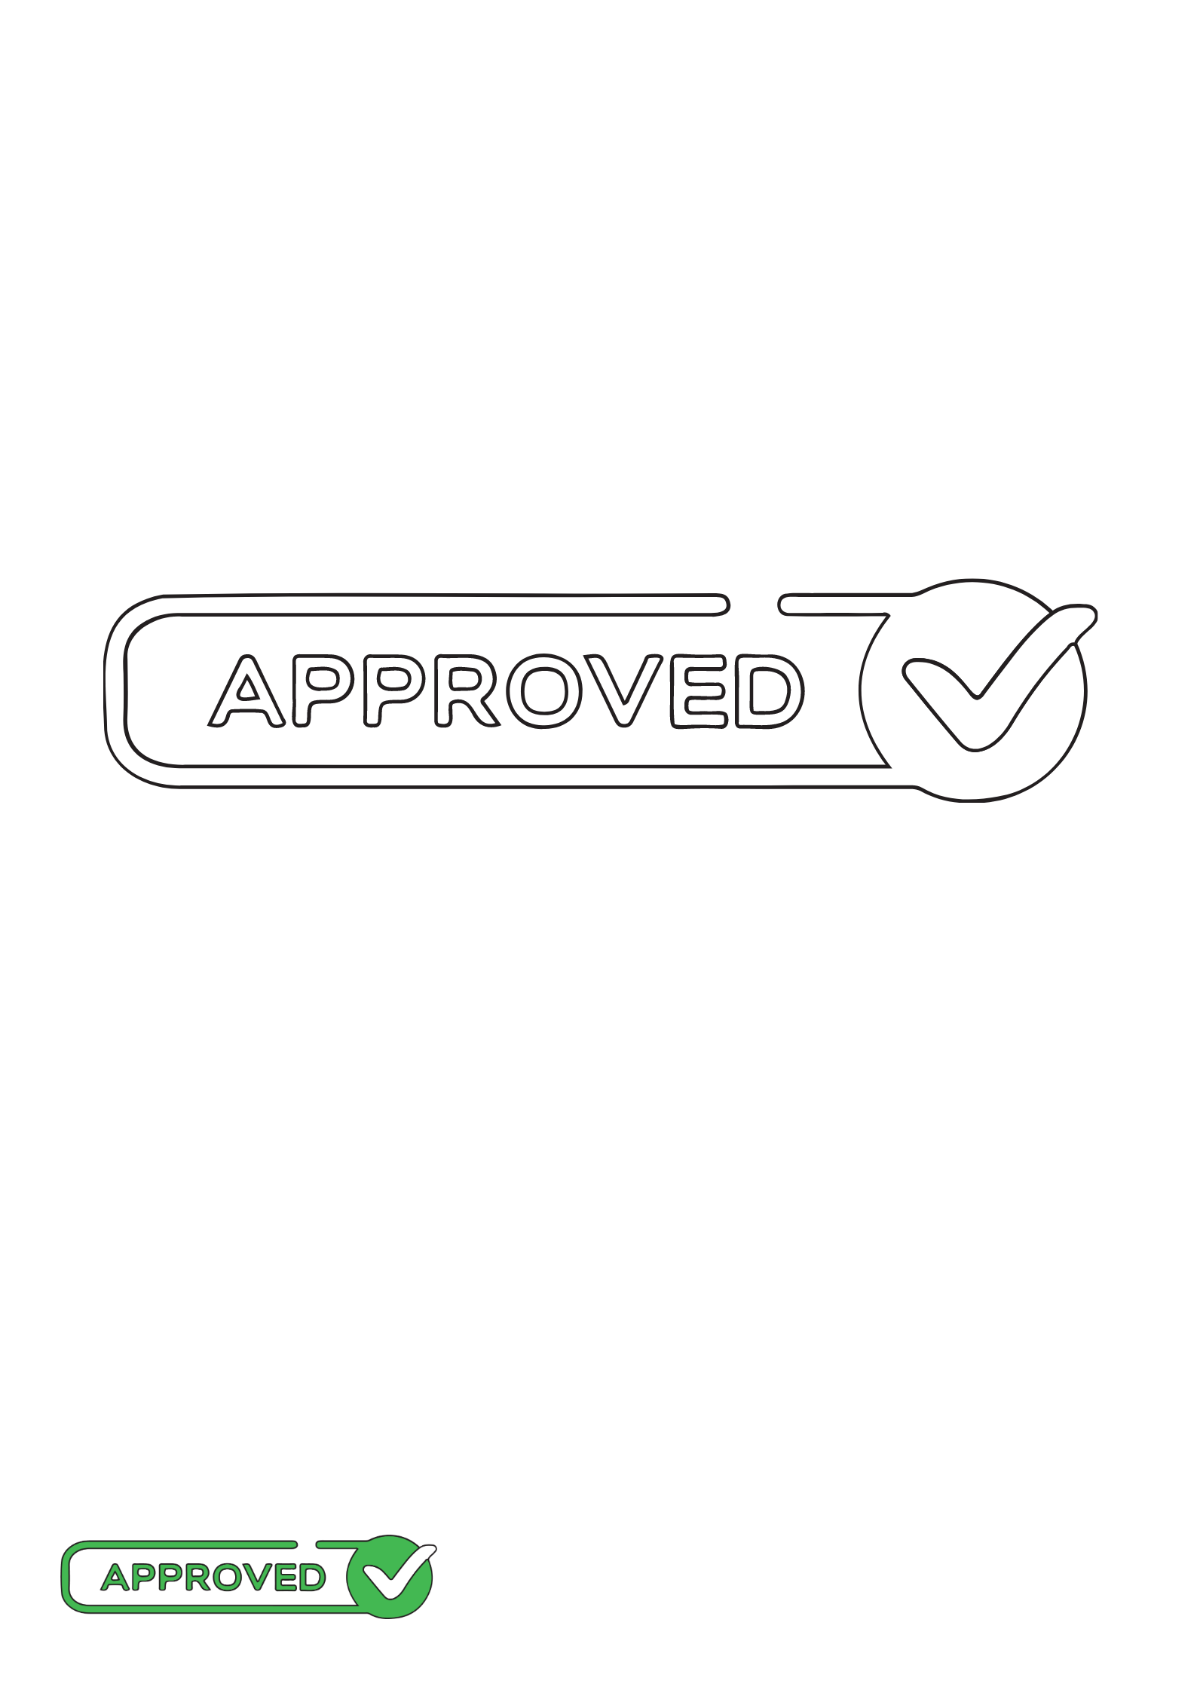 Tick Mark Approved coloring page Template